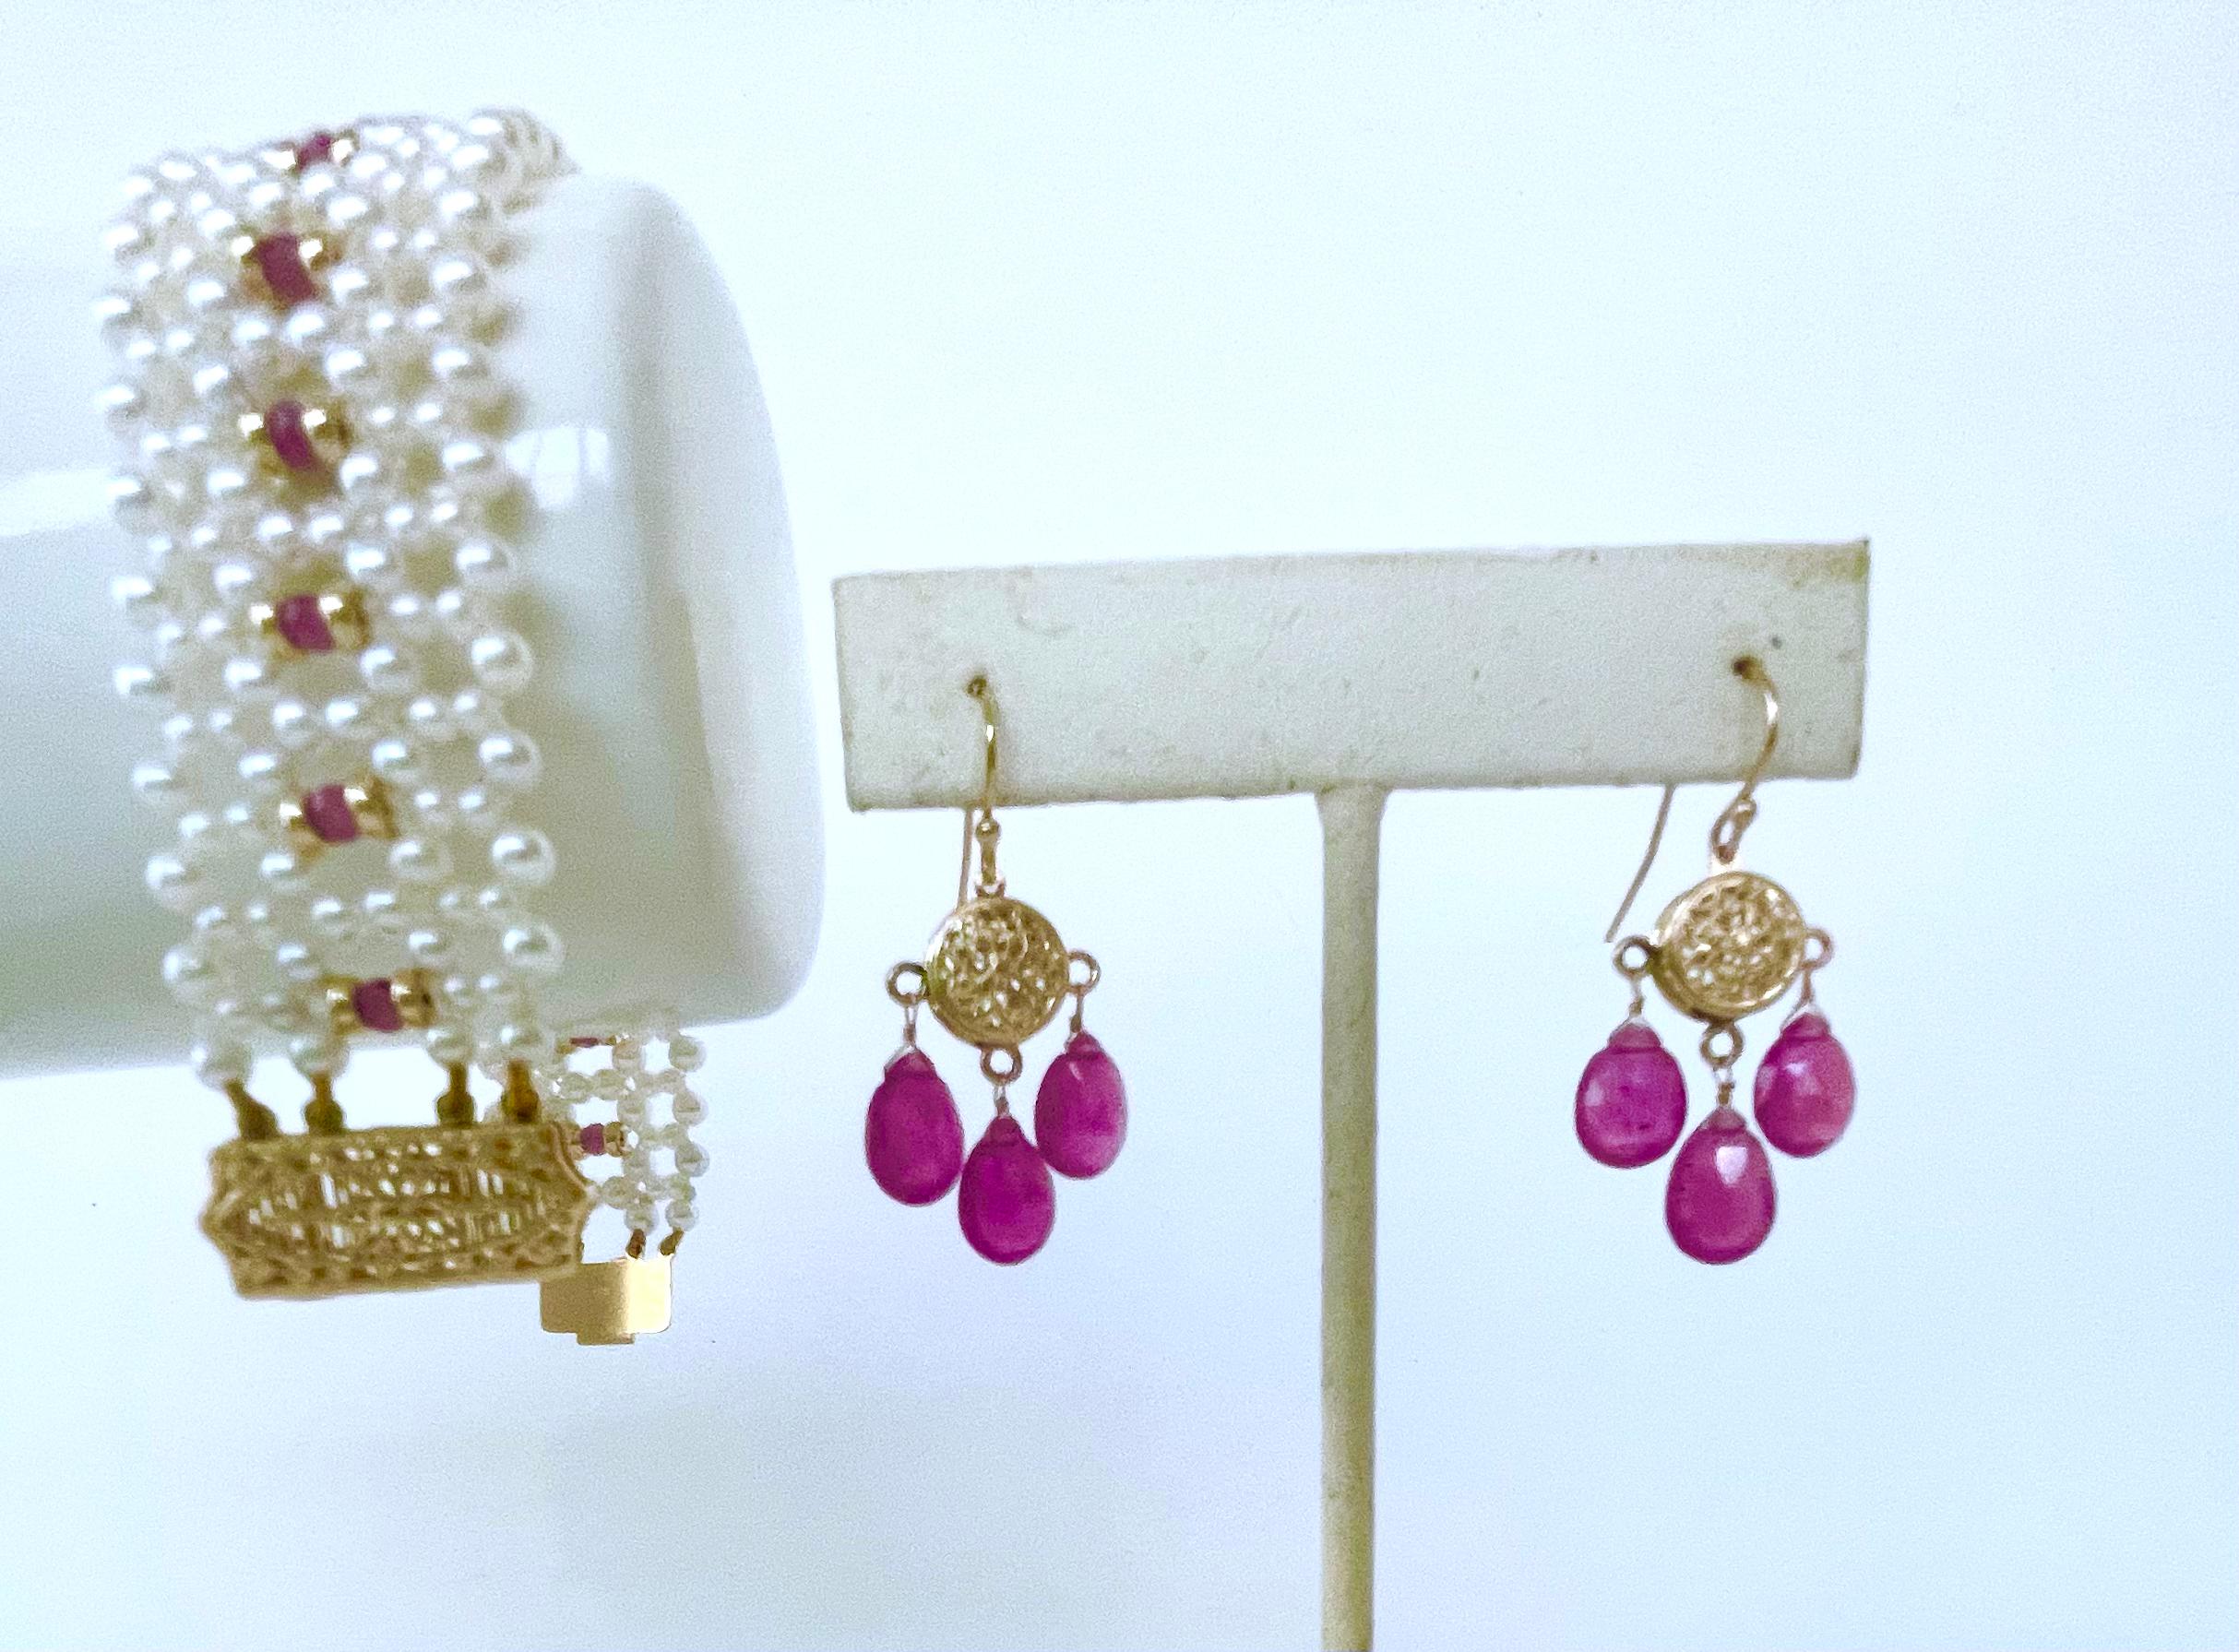 Beautiful pair of Earrings by Marina J.
This pair is made with all solid 14k Yellow Gold wiring and findings. A circular solid 14k Yellow Gold filigree Finding is used as a Centerpiece, from which stunning faceted Teardrop shaped Pink Sapphires that